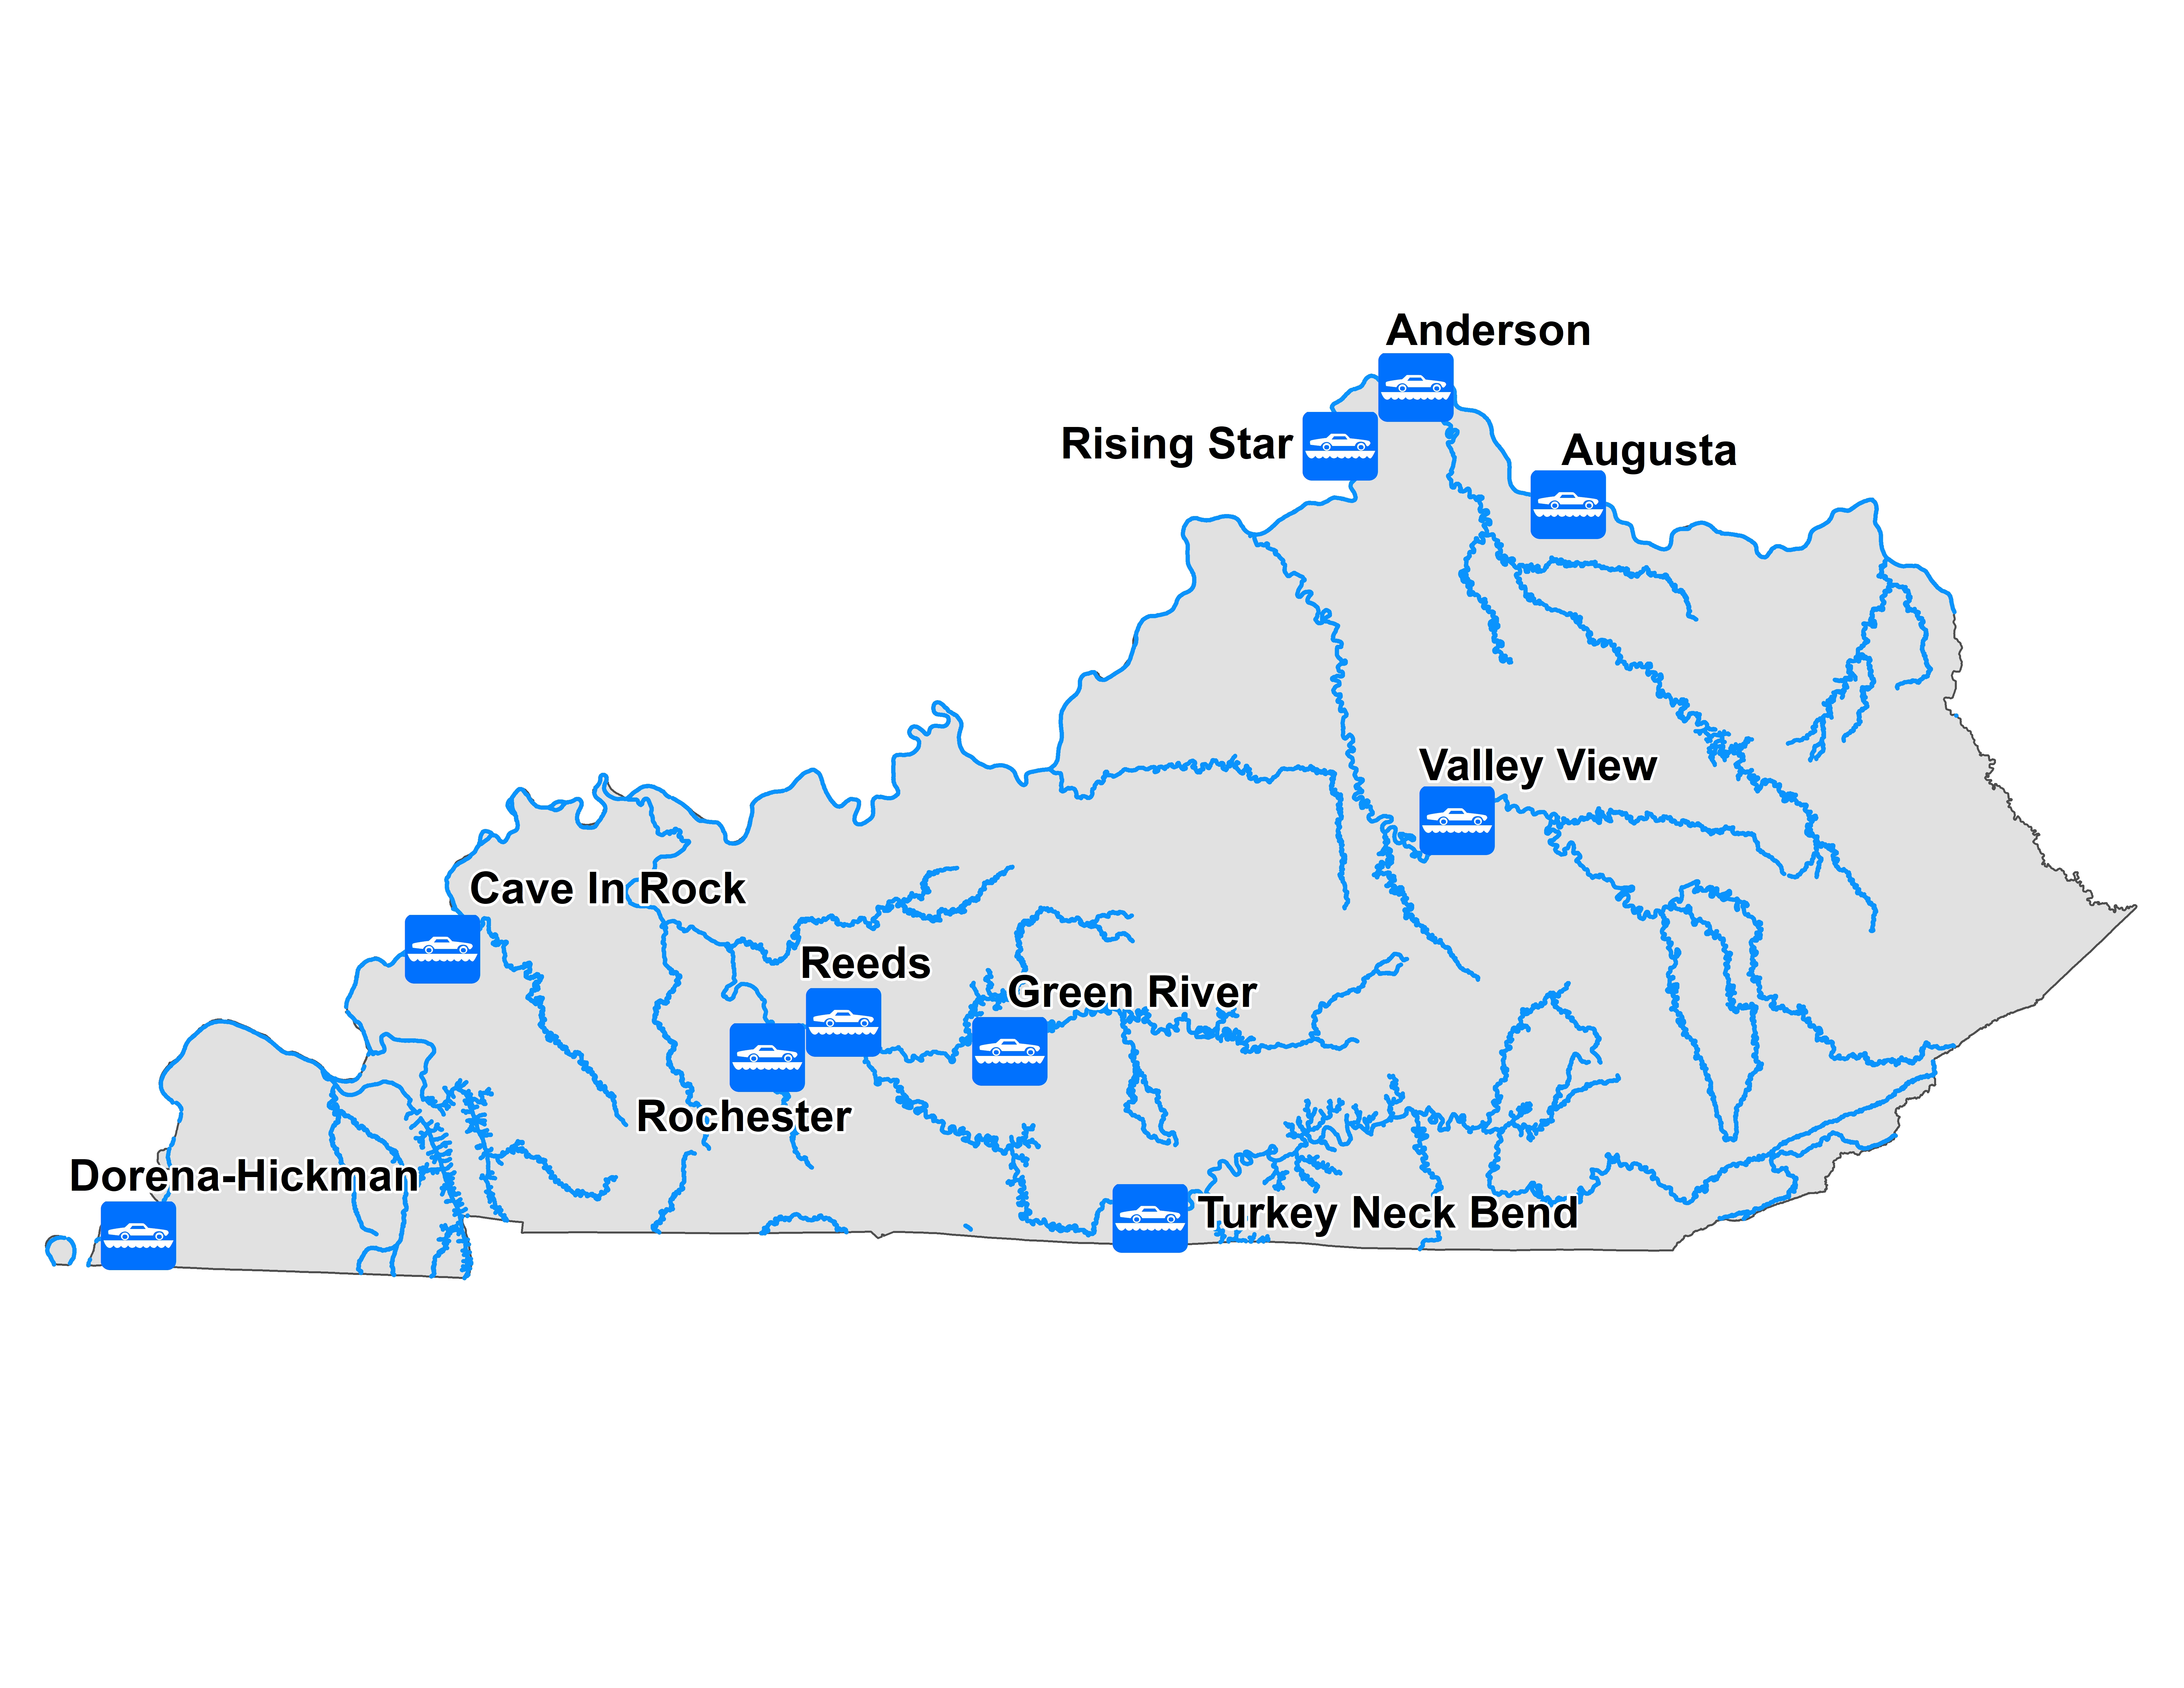 Map of Kentucky showing ferryboat locations